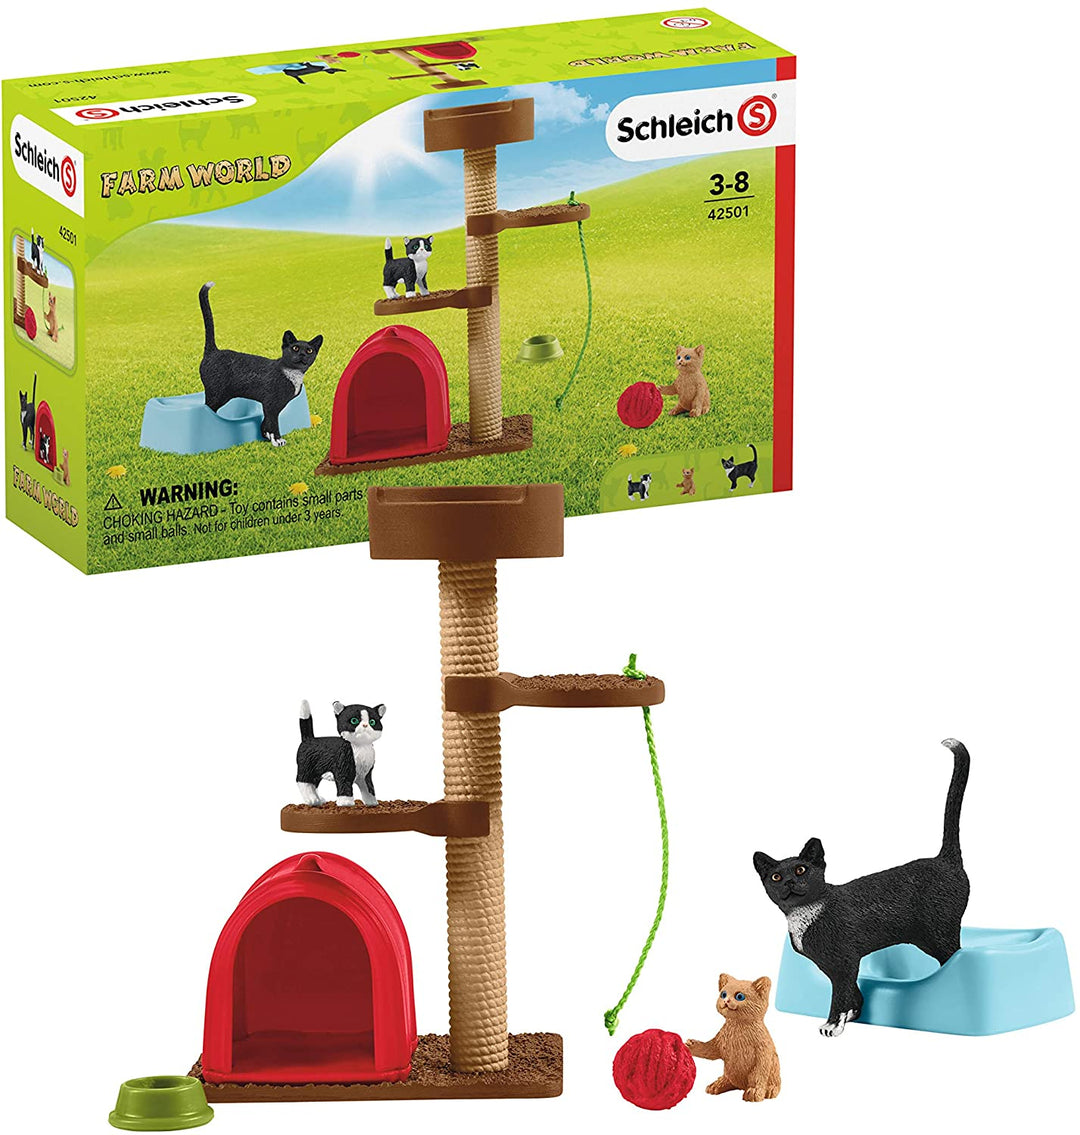 Schleich 42501 Playtime for Cute Cats Farm World